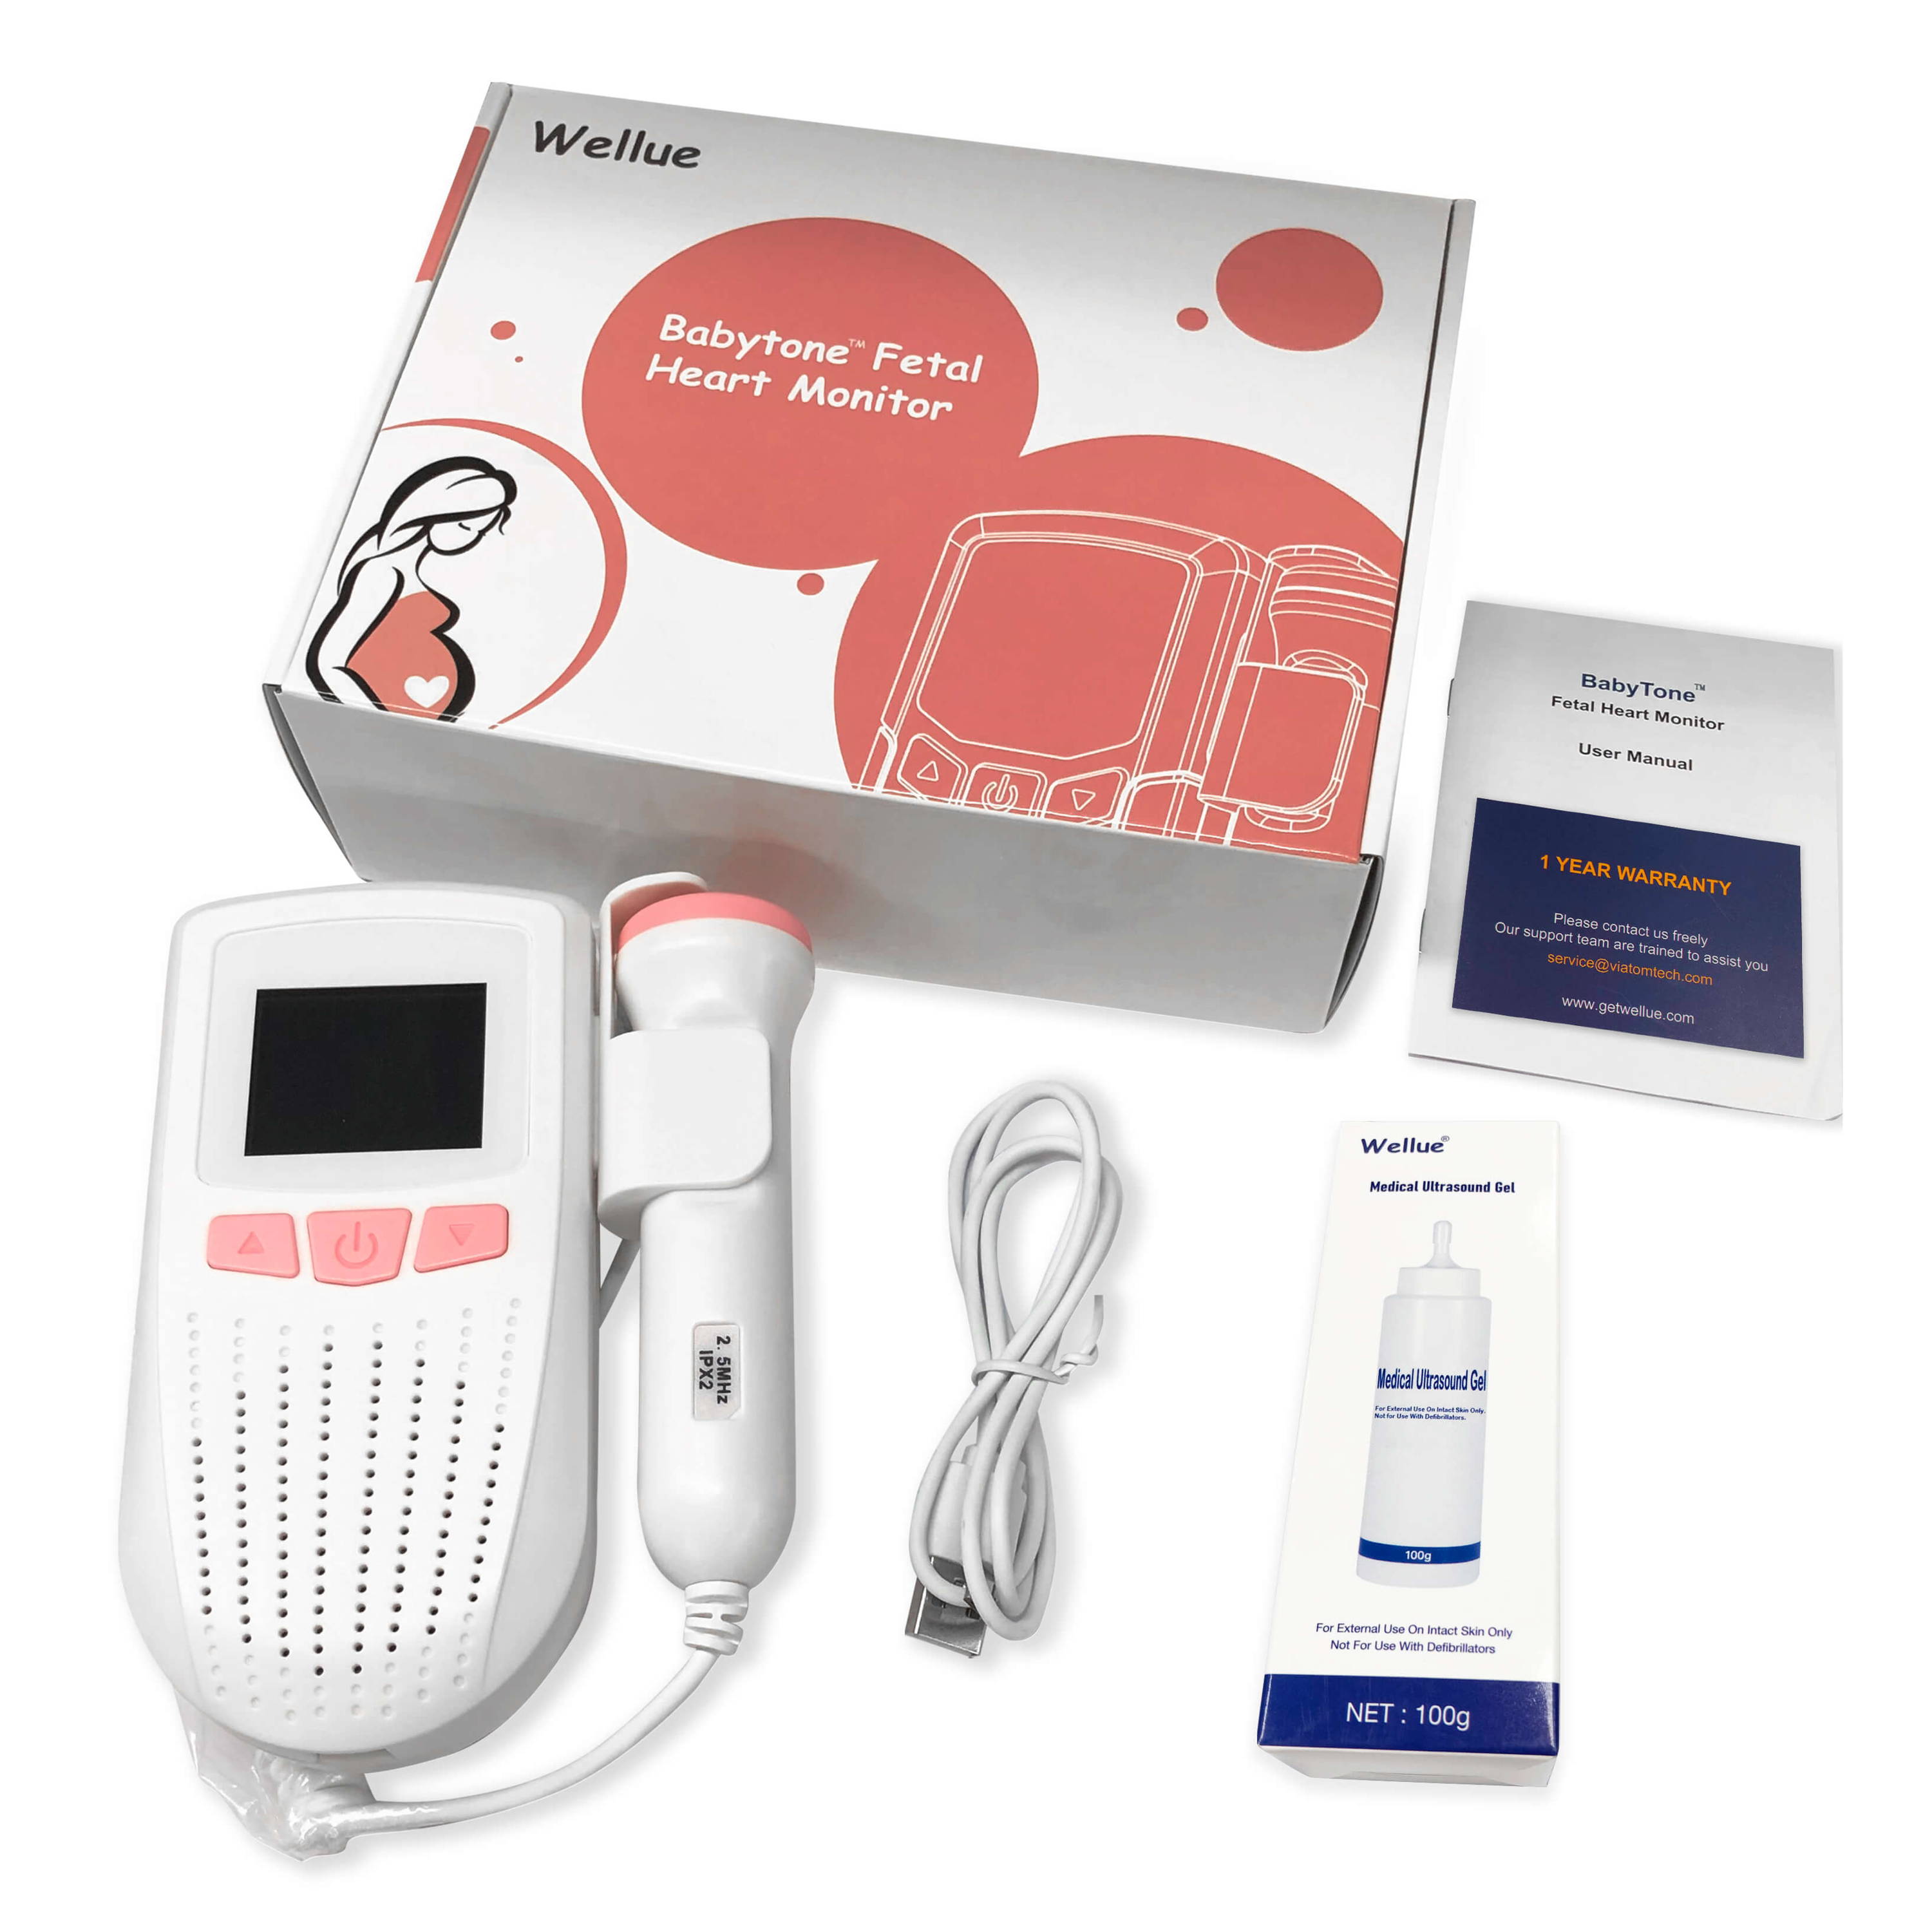 what does fetal heart monitor included